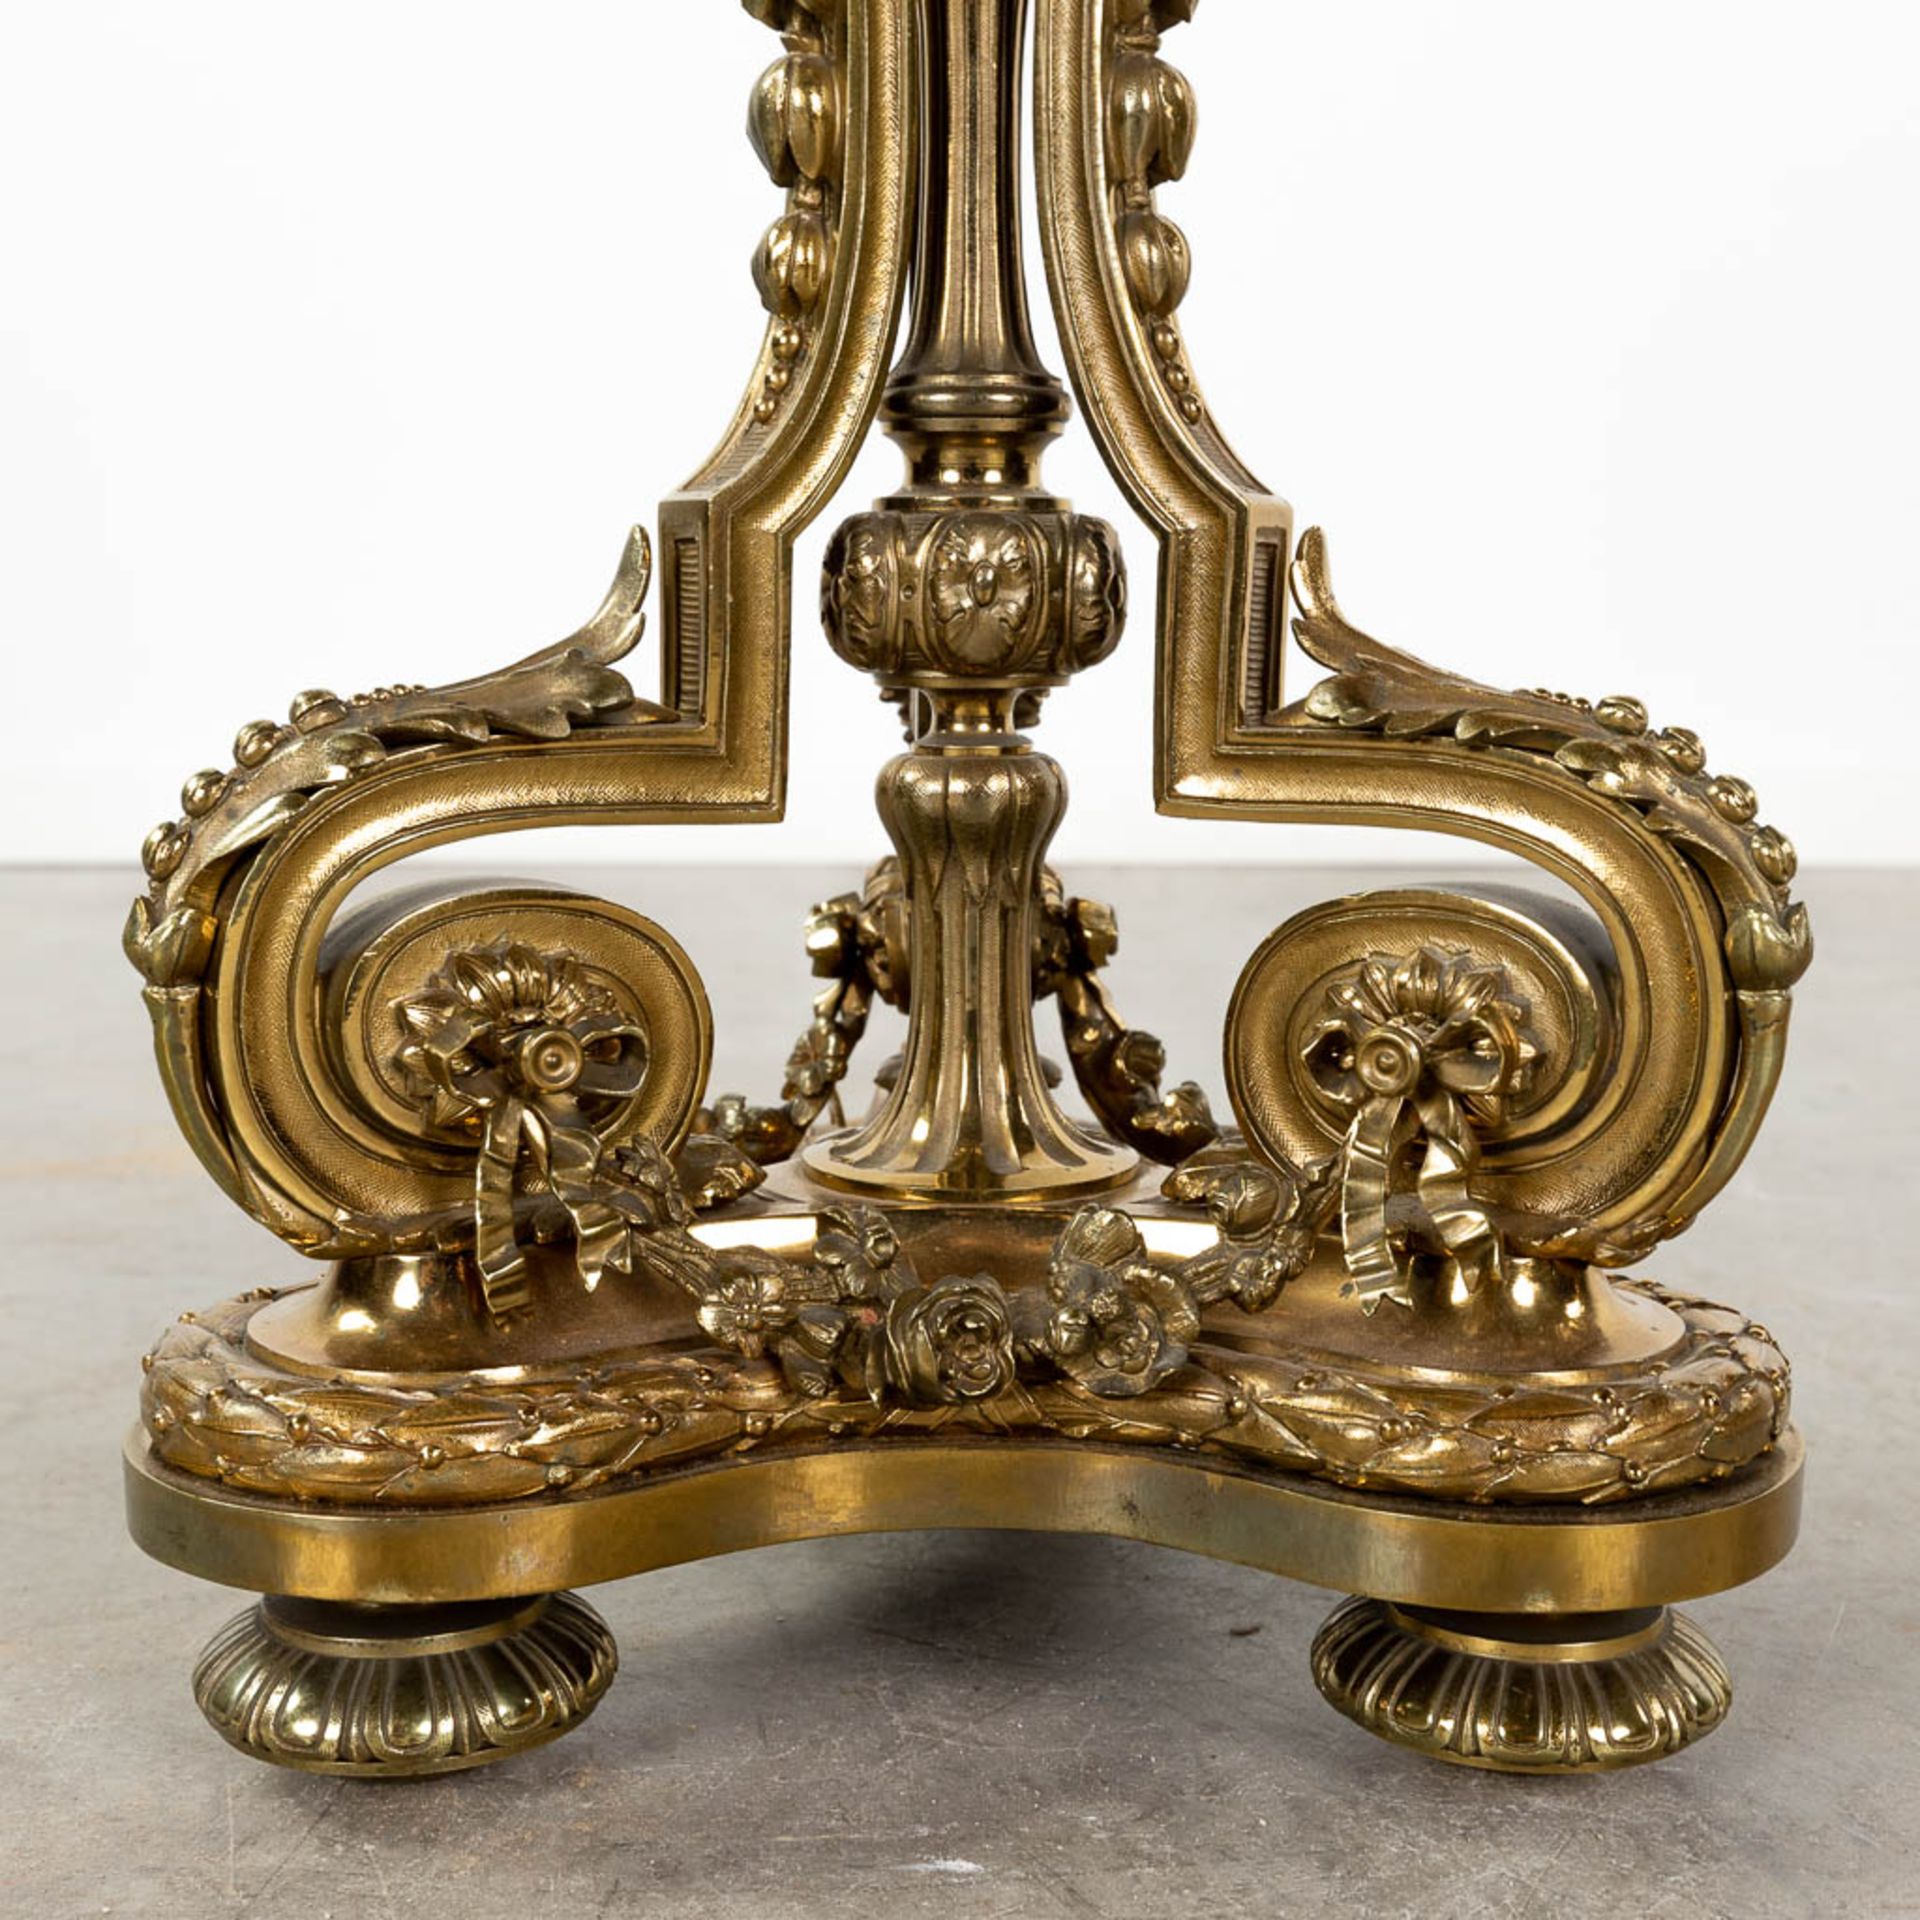 A pair of large neoclassical candelabra made of polished bronze. (L:30 x W:30 x H:90 x D:42,5 cm) - Image 6 of 12